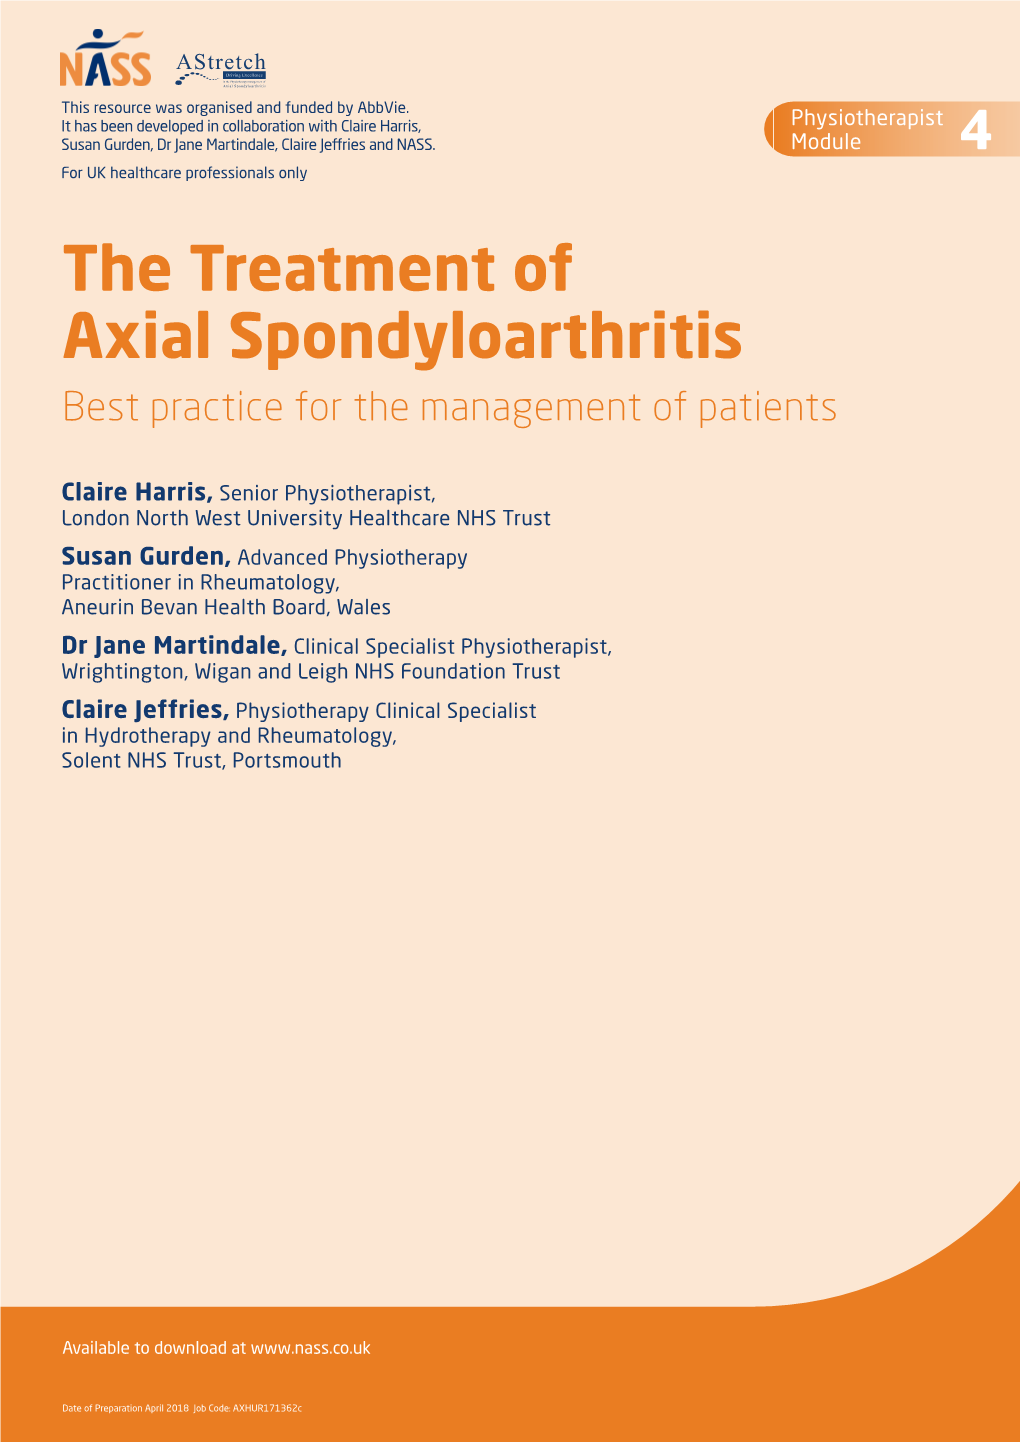 The Treatment of Axial Spondyloarthritis Best Practice for the Management of Patients